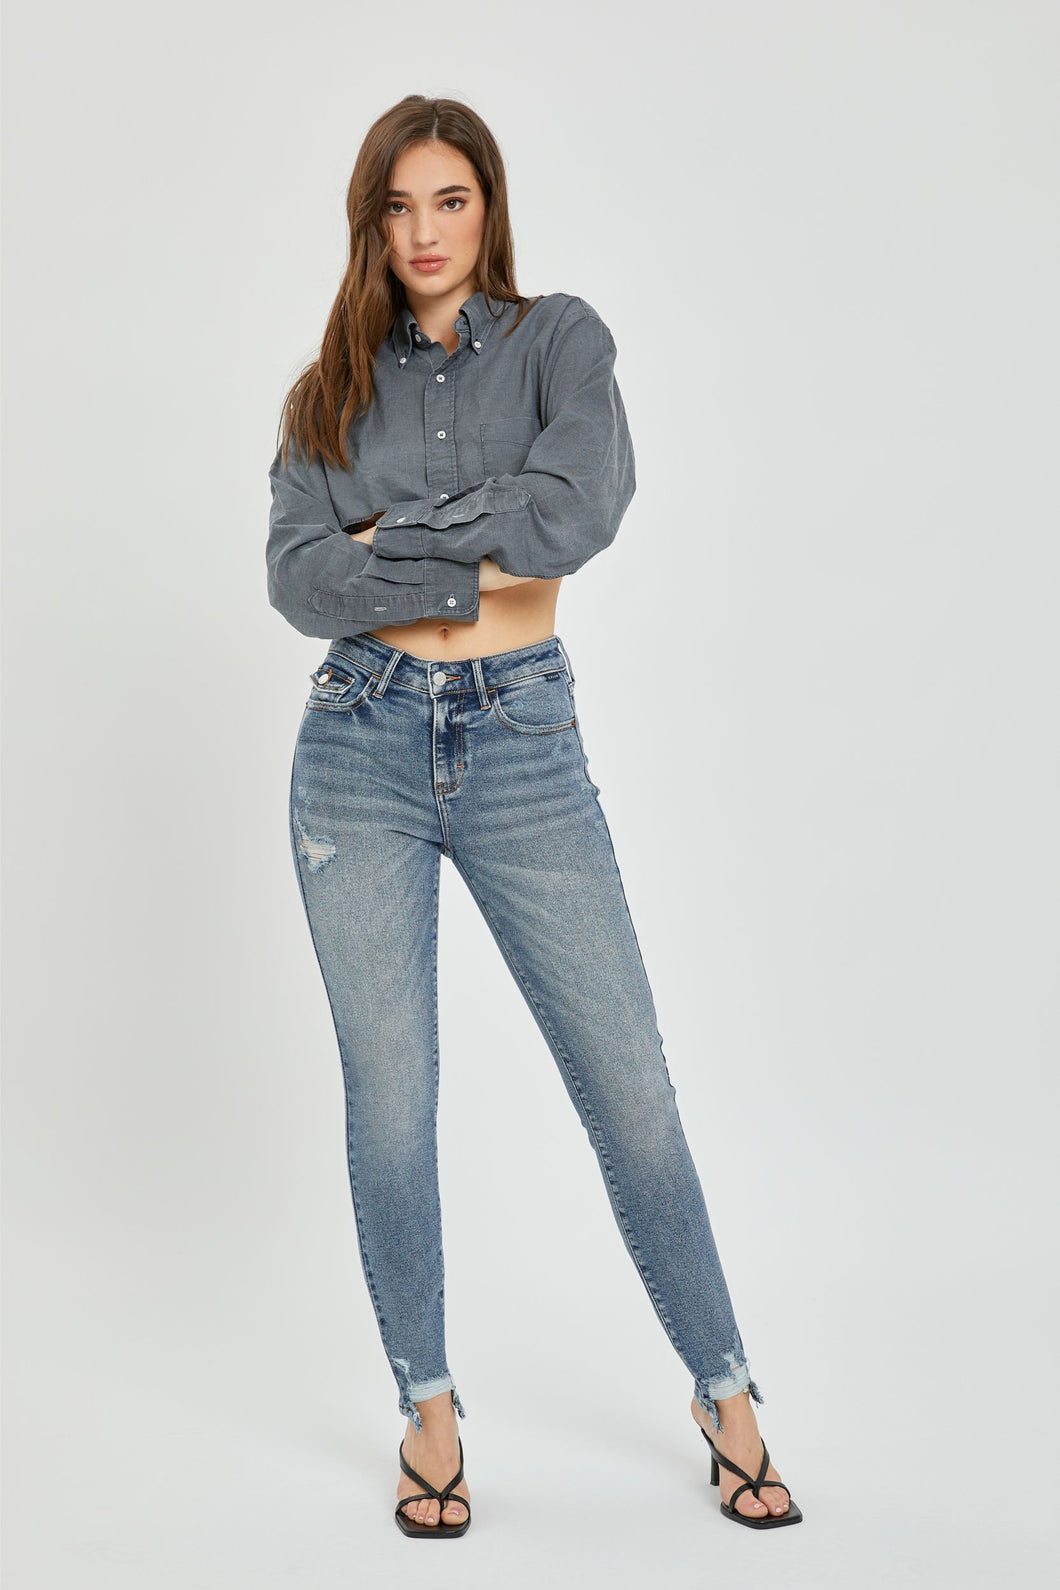 Cello Jeans Mid Rise Skinny Ankle Jeans in Tint